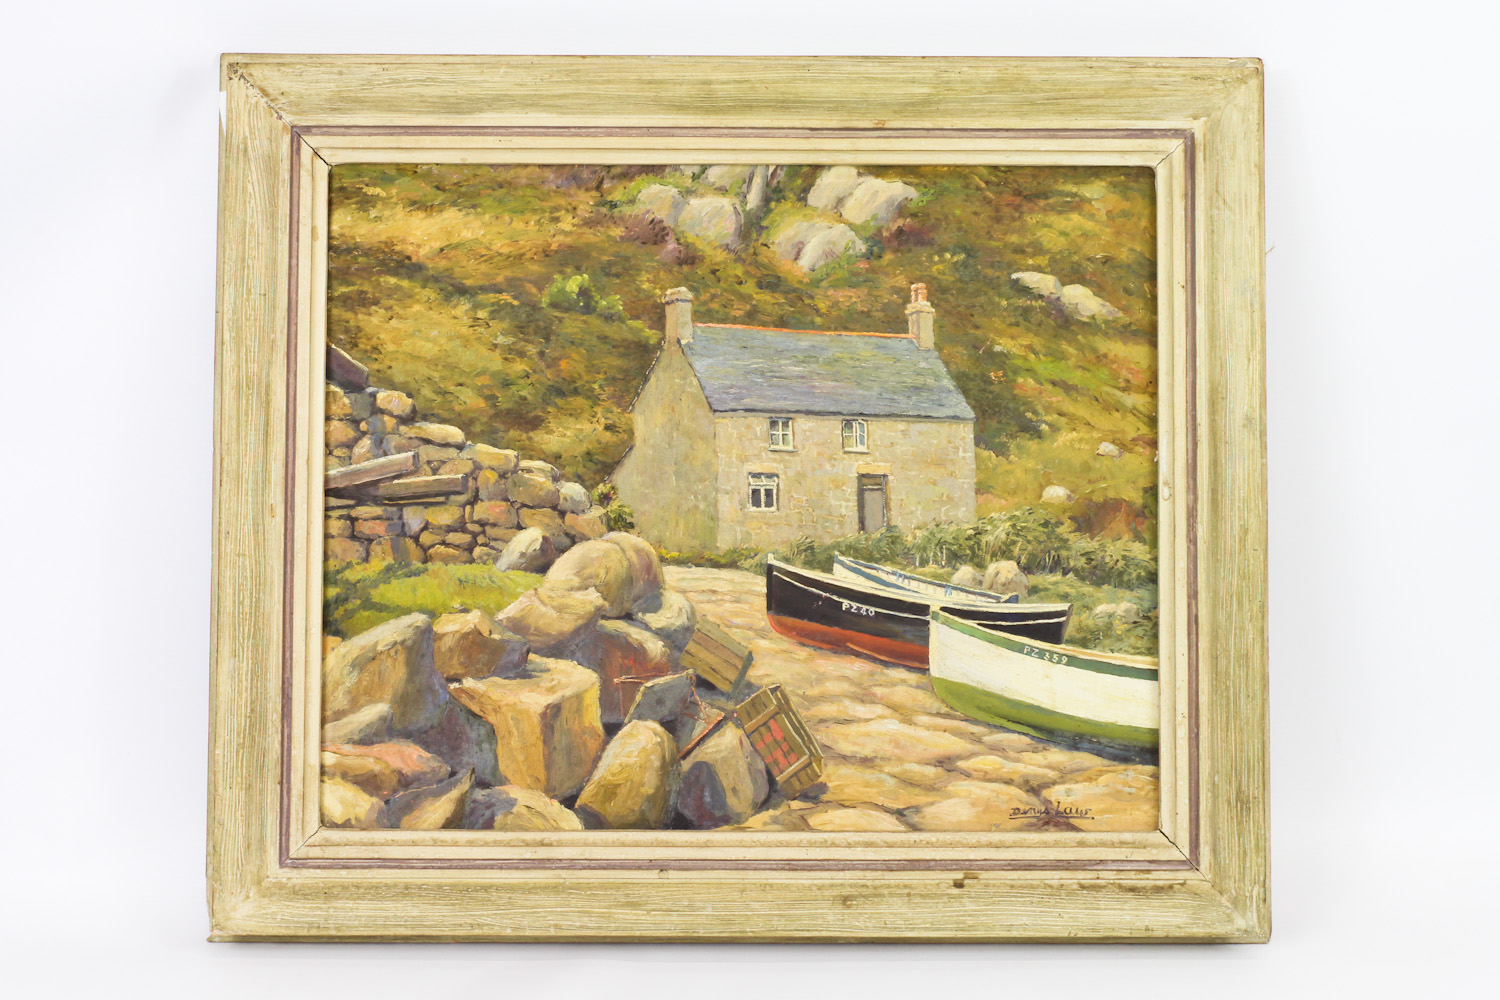 Denys Law (1907-1981) - fishing cottage with boats, Penzance, Cornwall, oil on board, signed lower